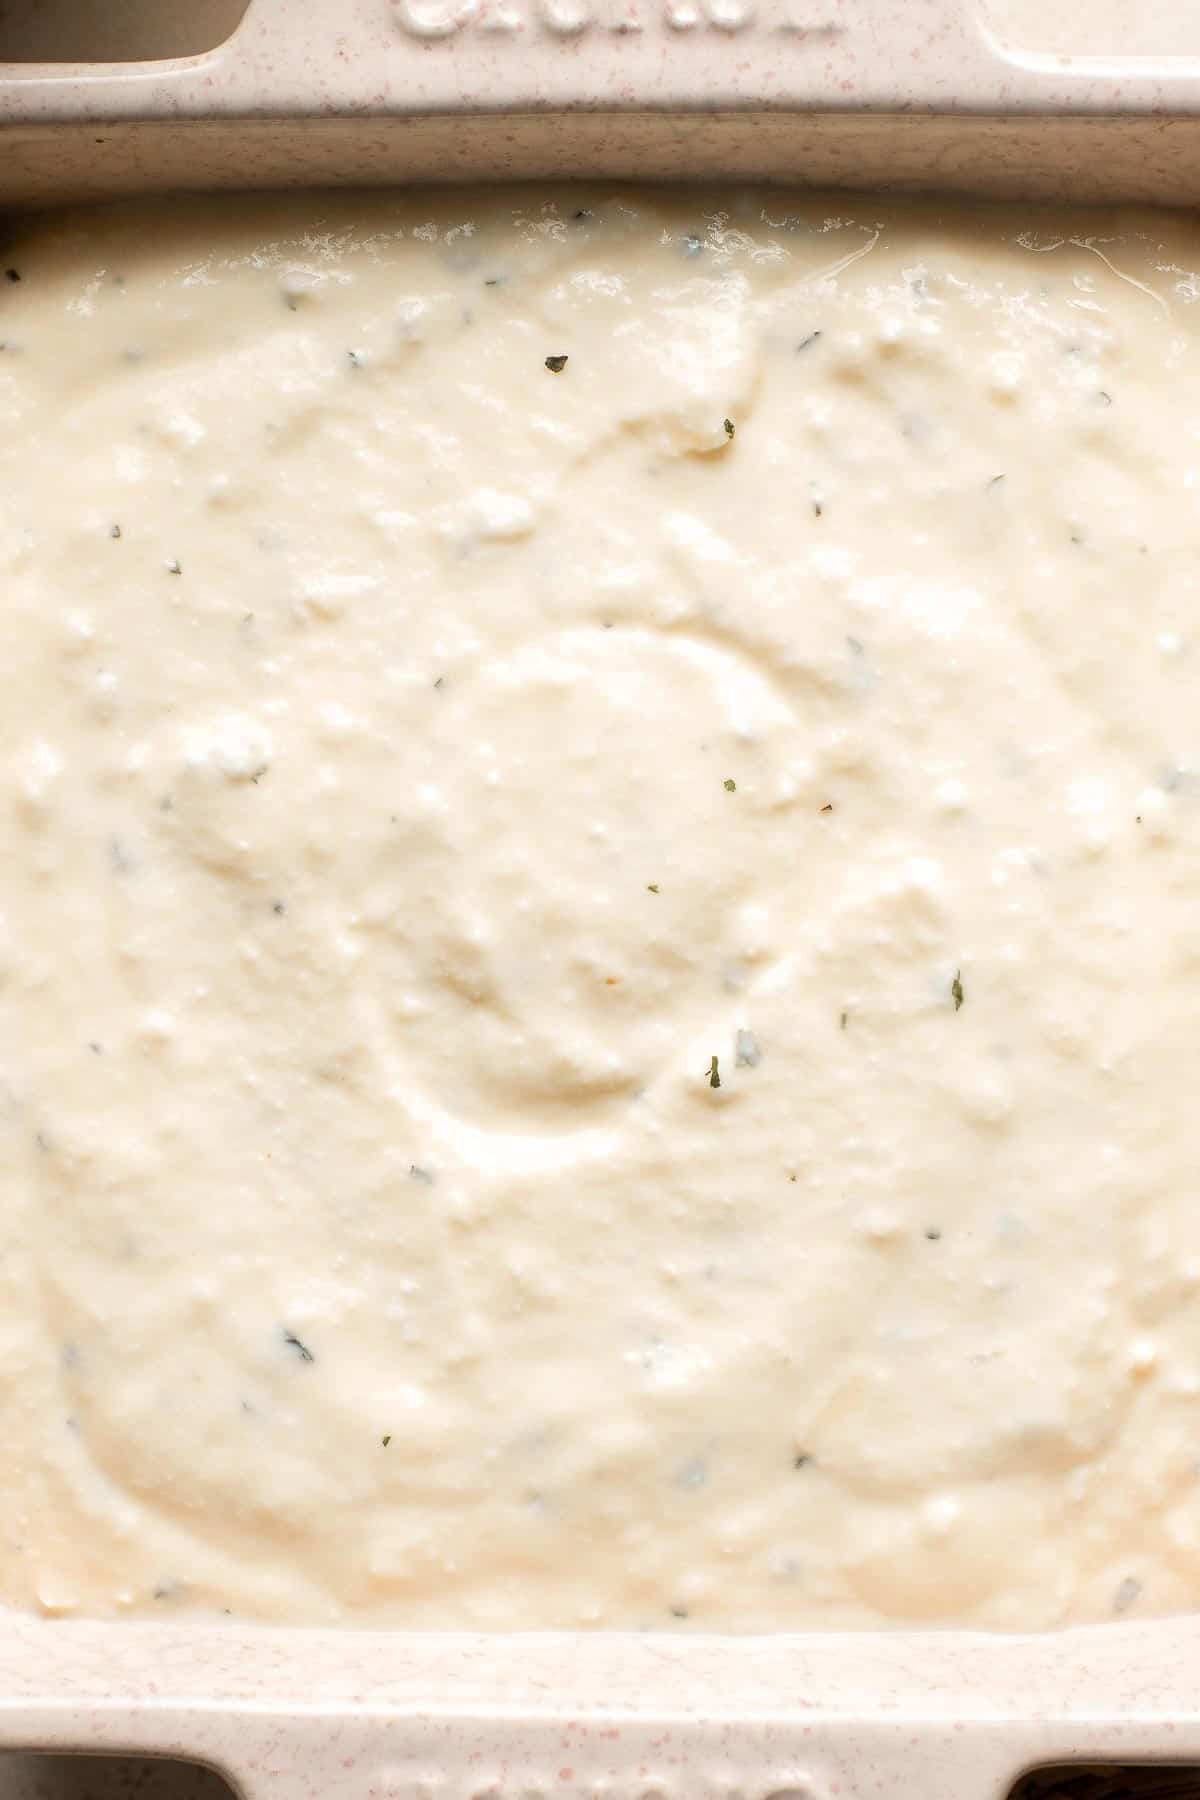 Baked ricotta is creamy, smooth, and flavorful. This delicious warm dip is packed with Parmesan and seasoned with dried herbs for the ultimate cheesy dip. | aheadofthyme.com